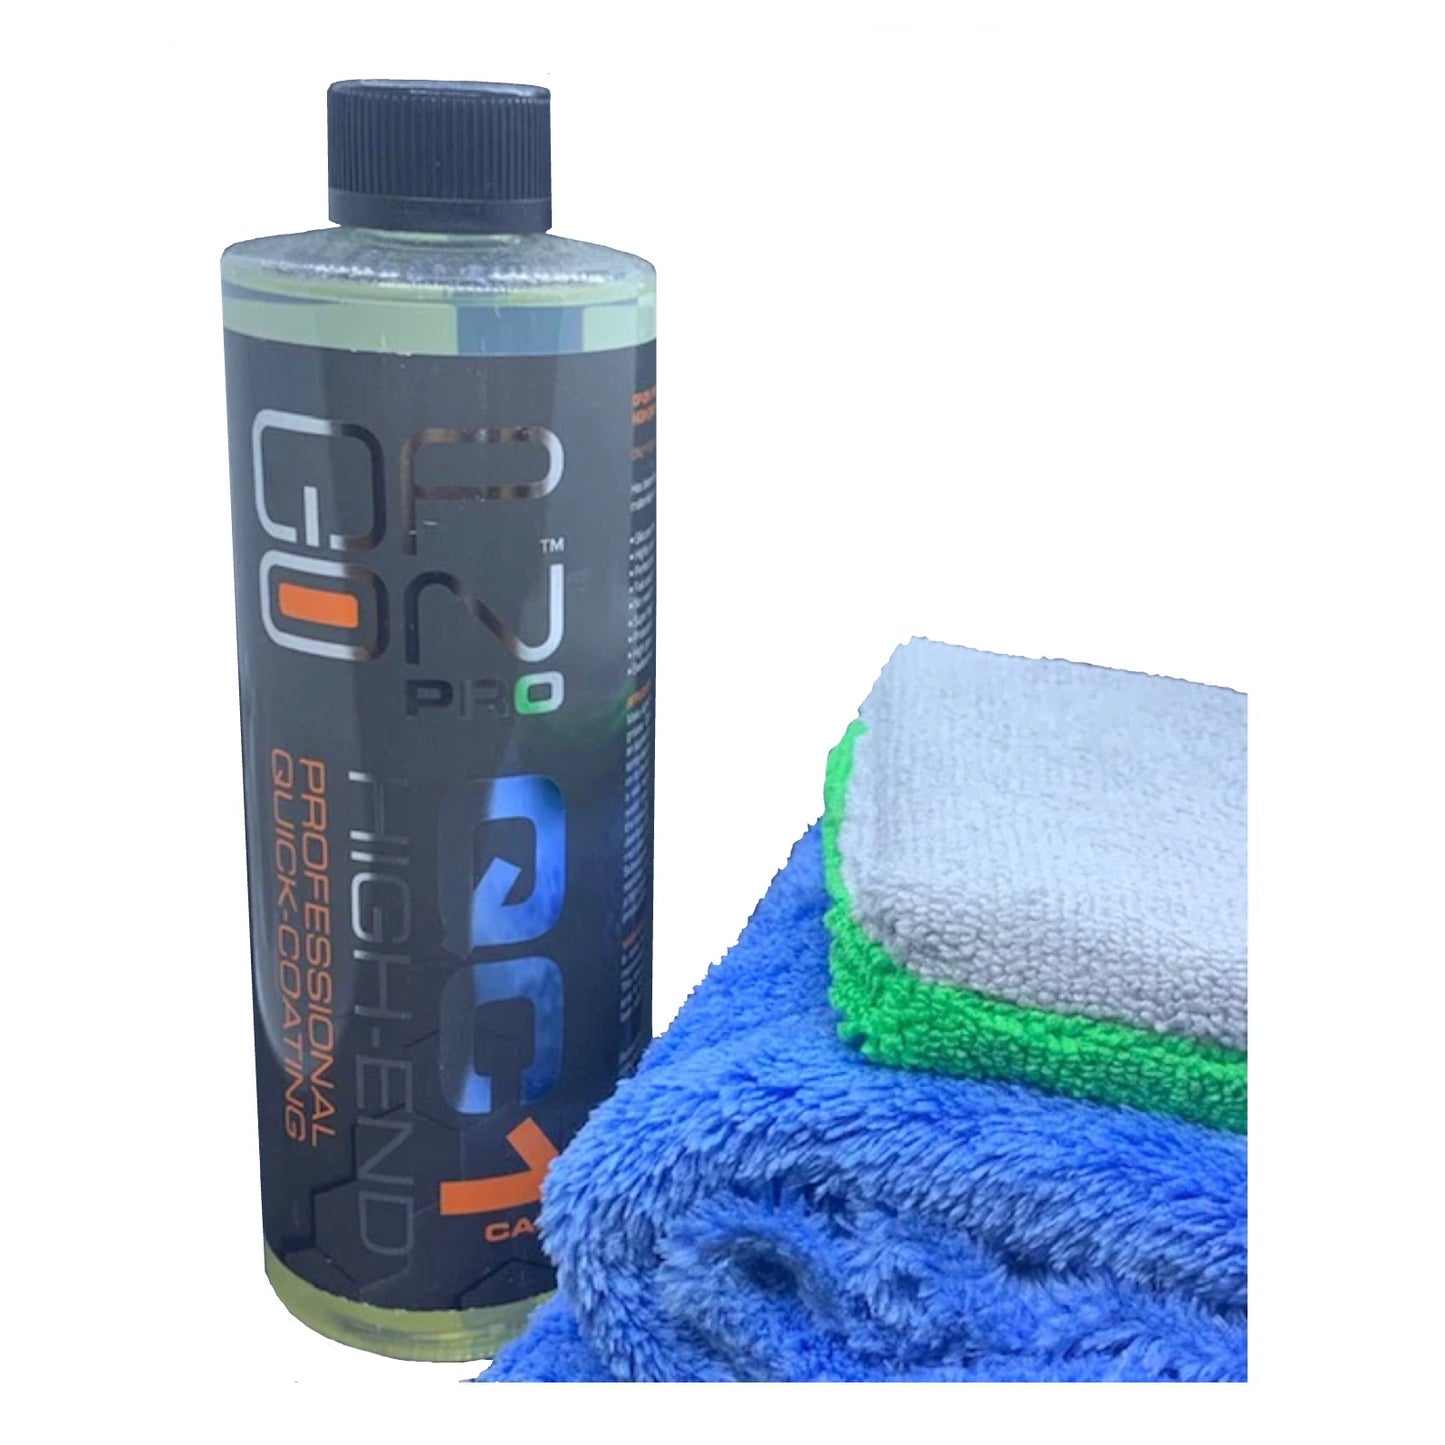 QP-ON  PRO QC1 with Applicator Pad and Microfiber Towel